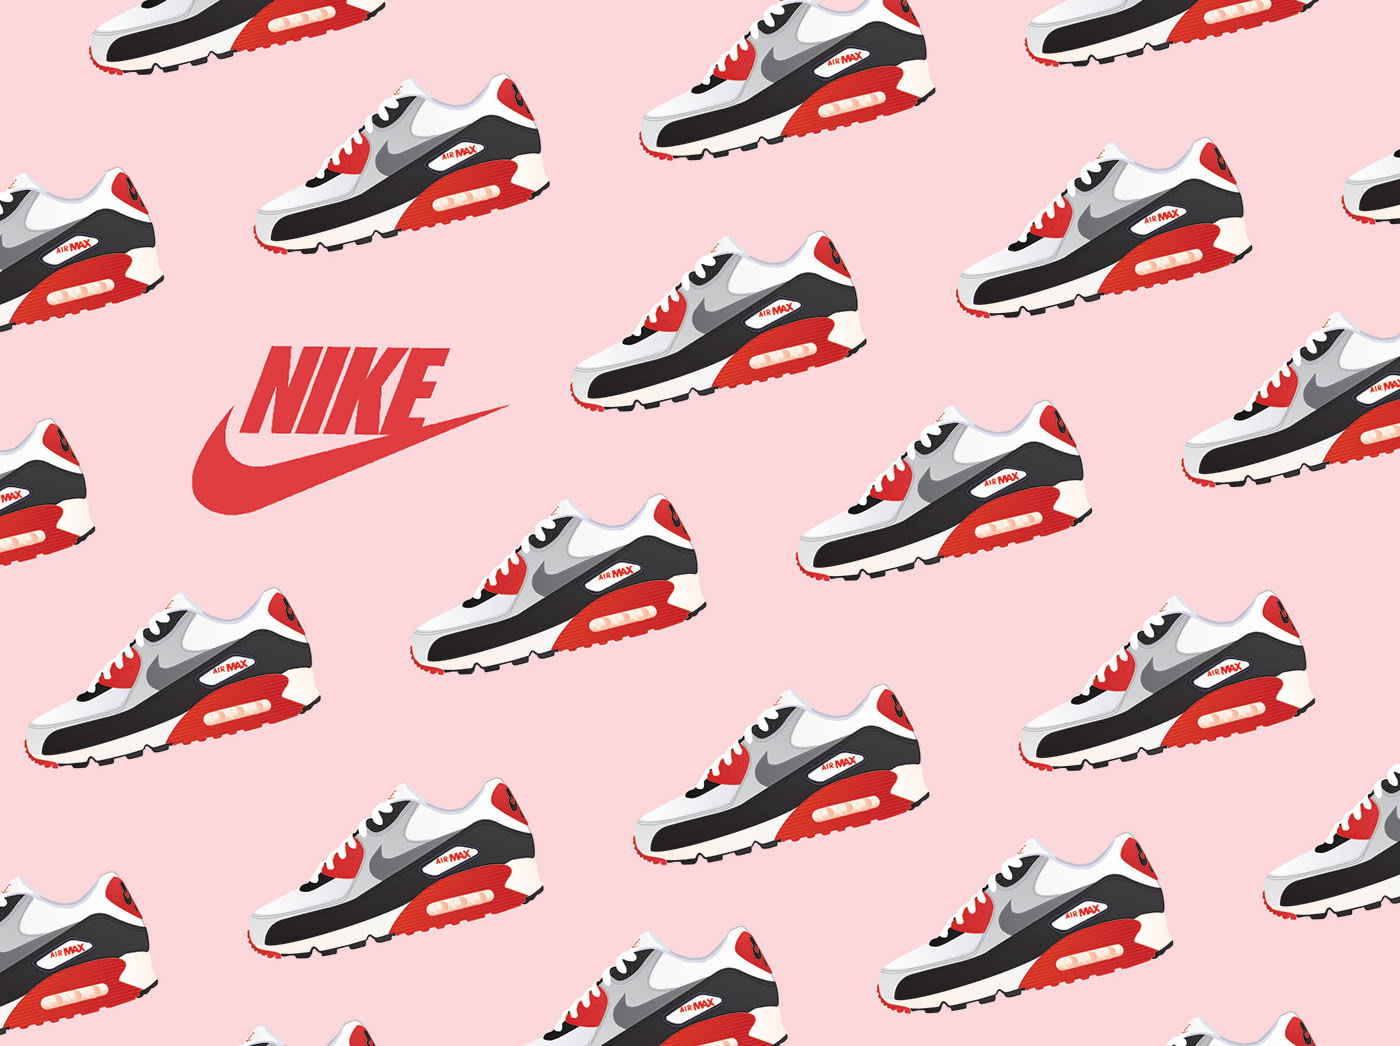 Nike Valentine's Day Campaign Concept on Behance